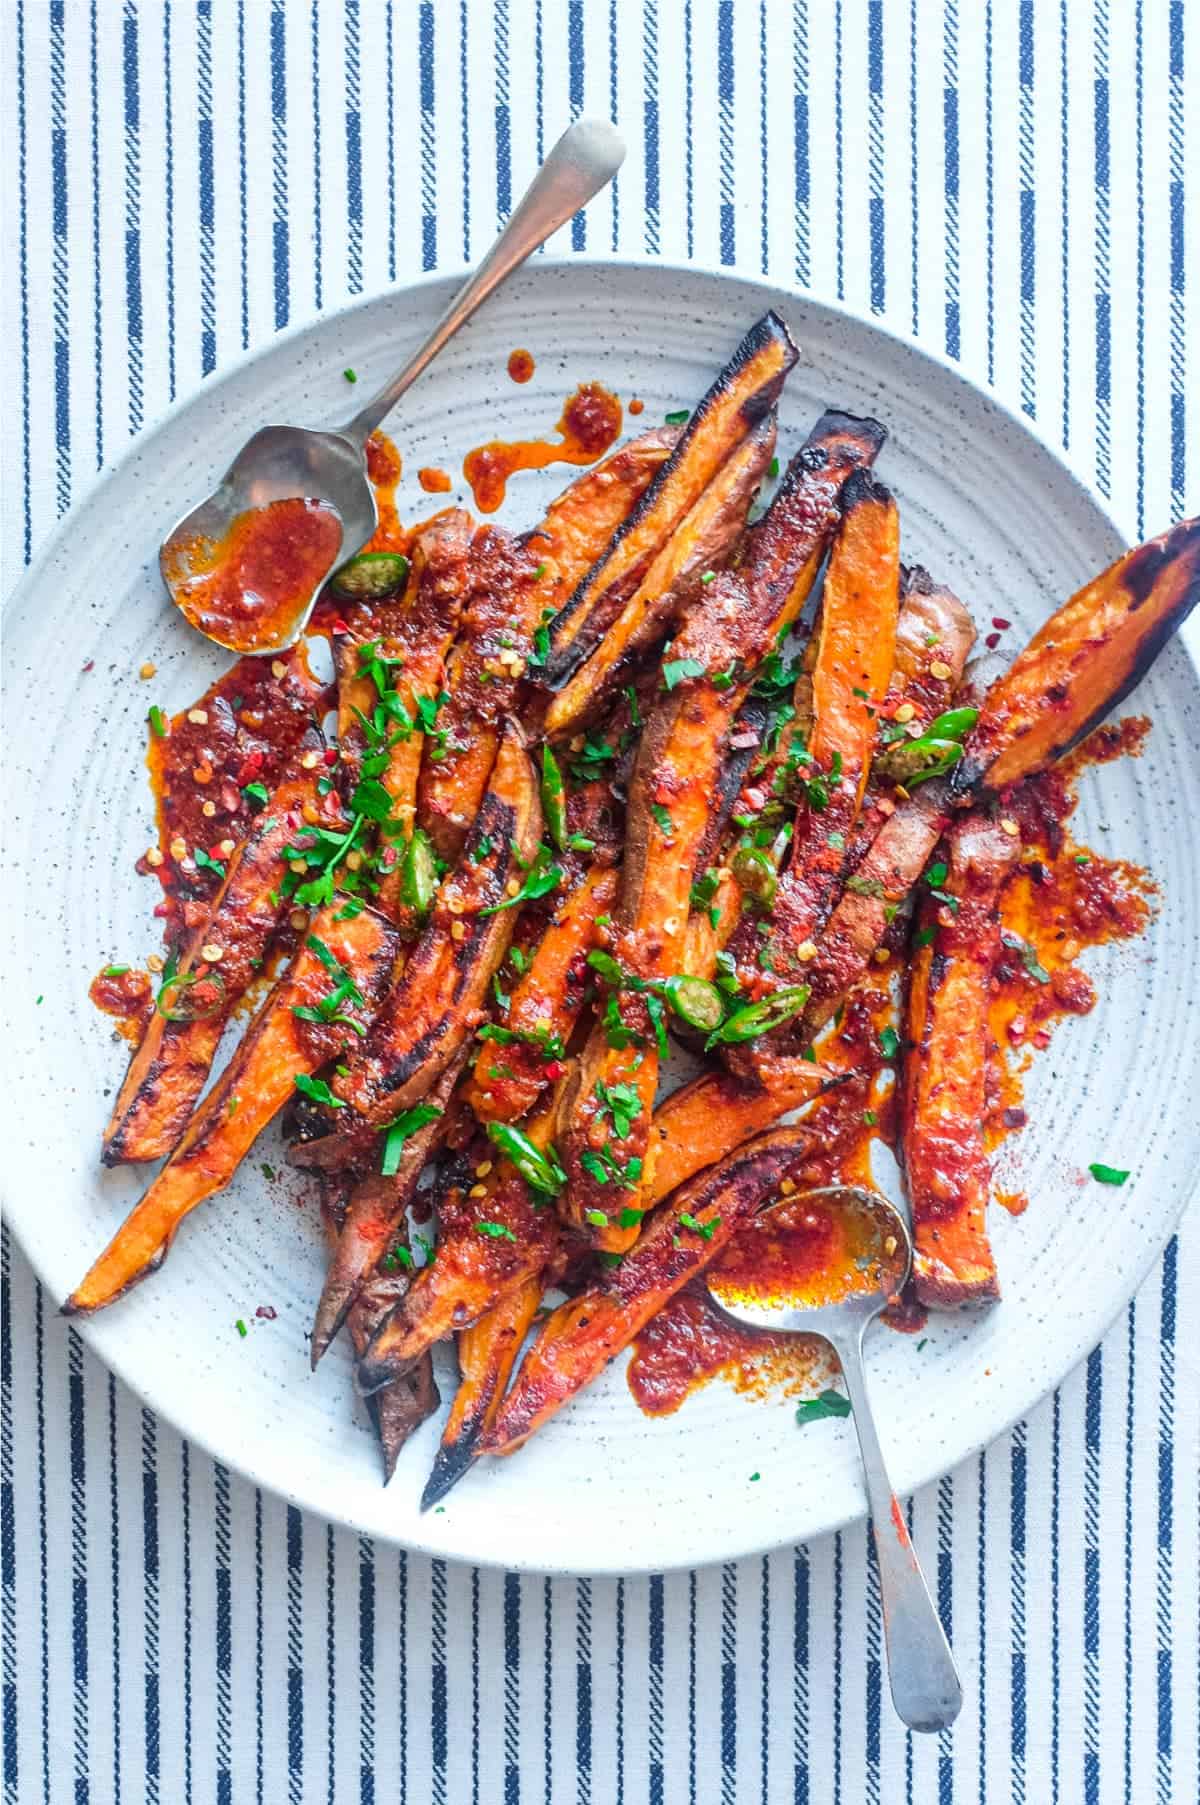 A plate of crisp and creamy sweet potato fries drizzled with a red sauce called Pilpelchuma. Fresh herbs and chillies are scattered over the potatoes too.